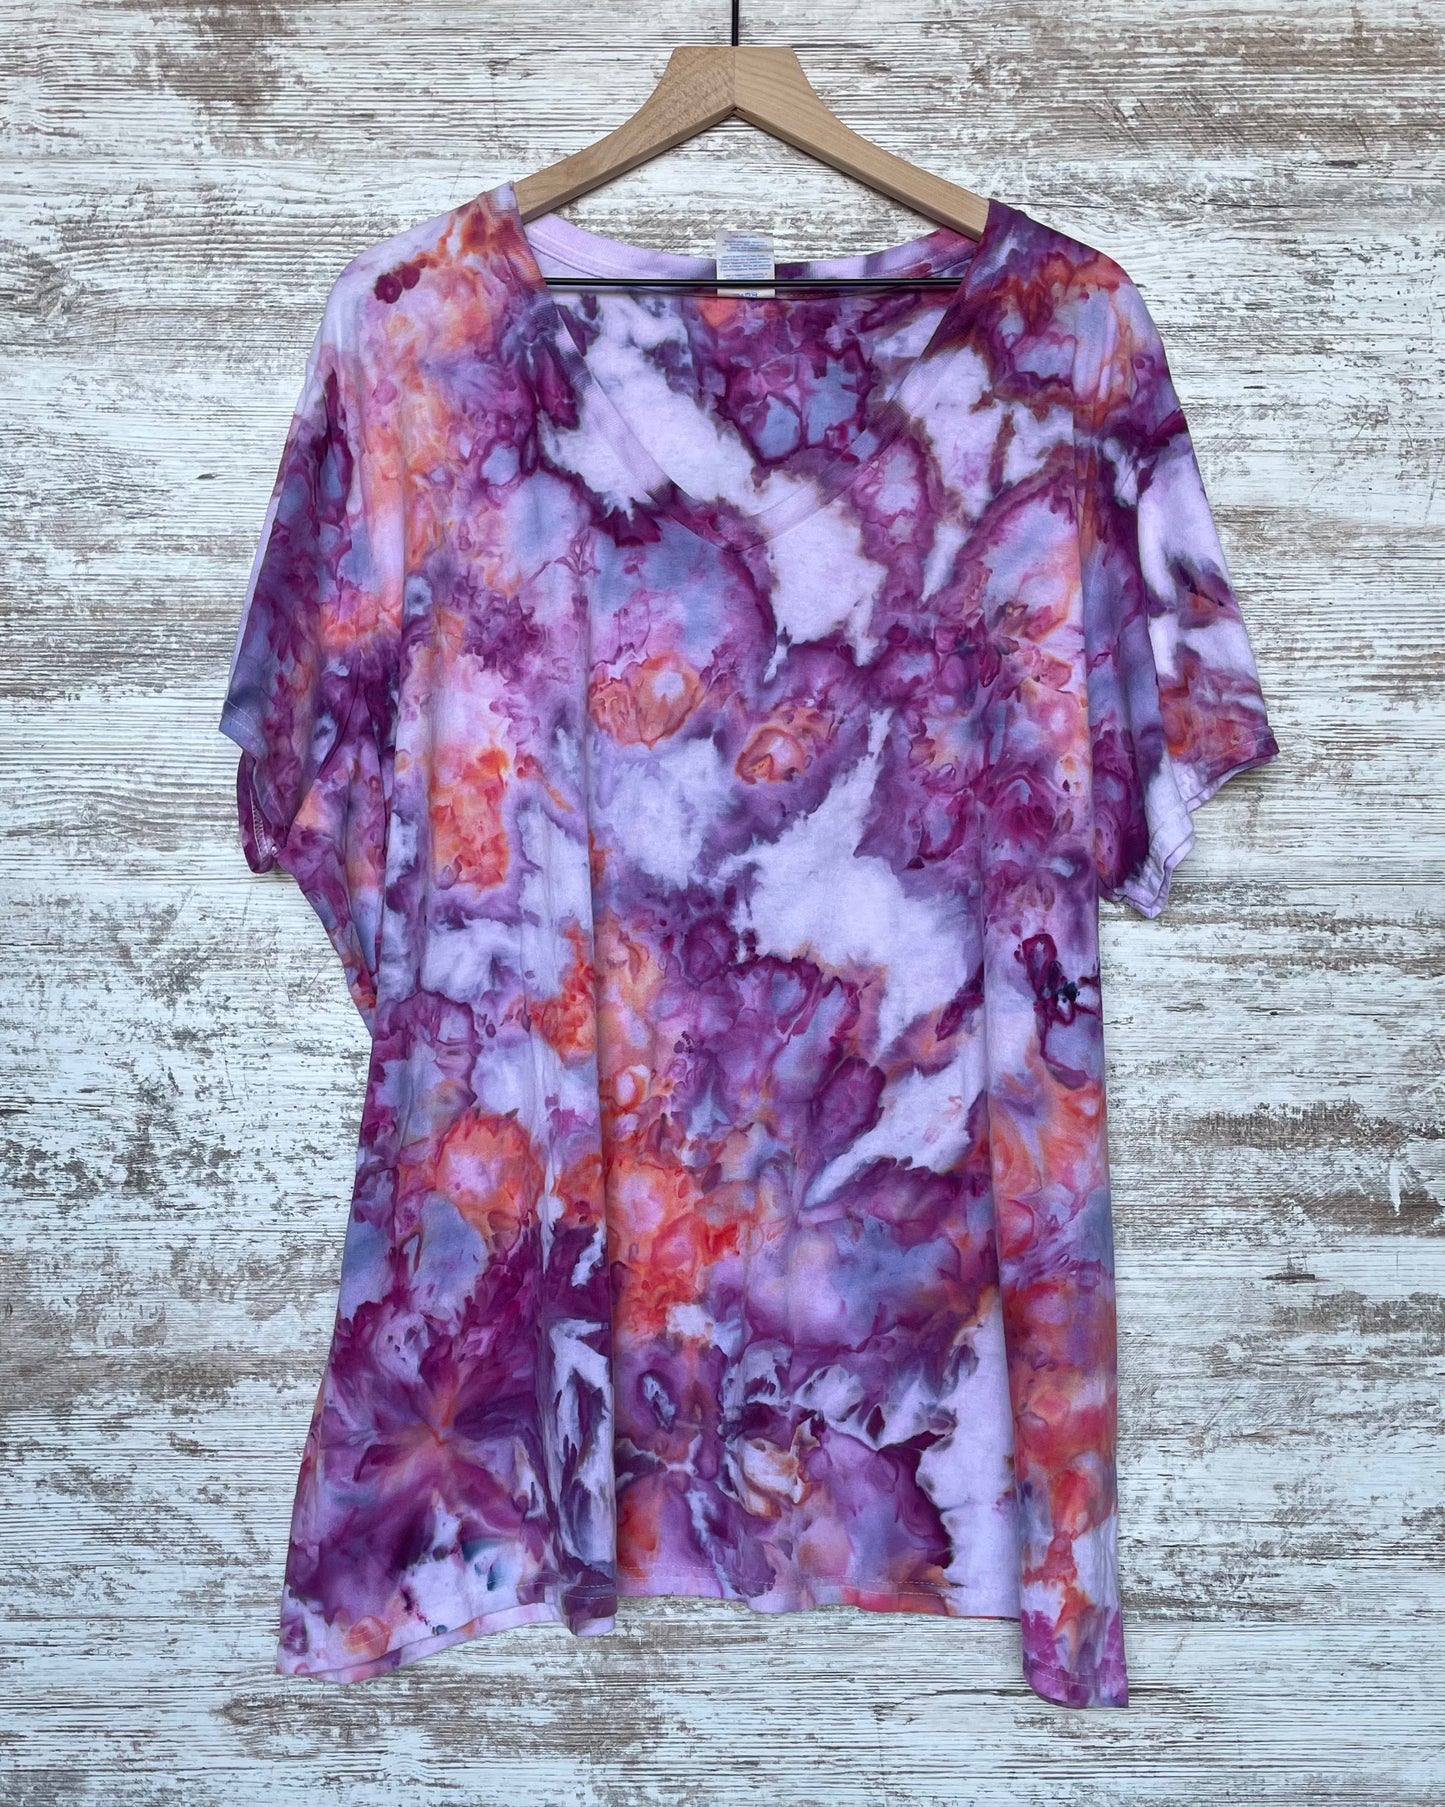 Coral & Plum Ice-Dyed Women's V-Neck T-shirt